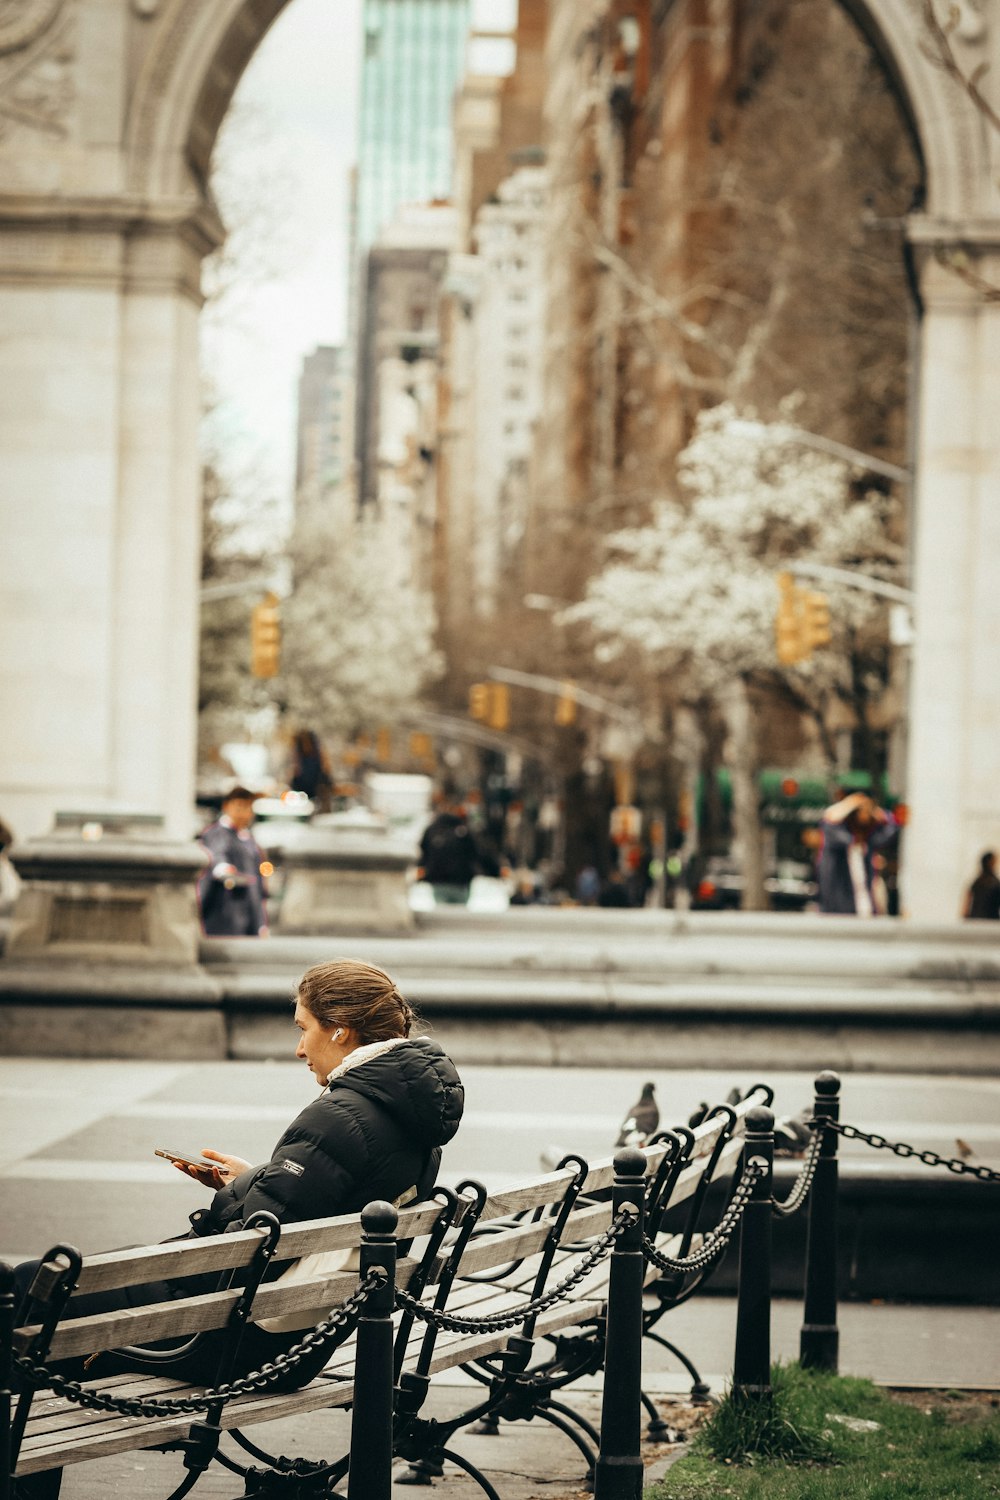 a person sitting on a bench using a cell phone